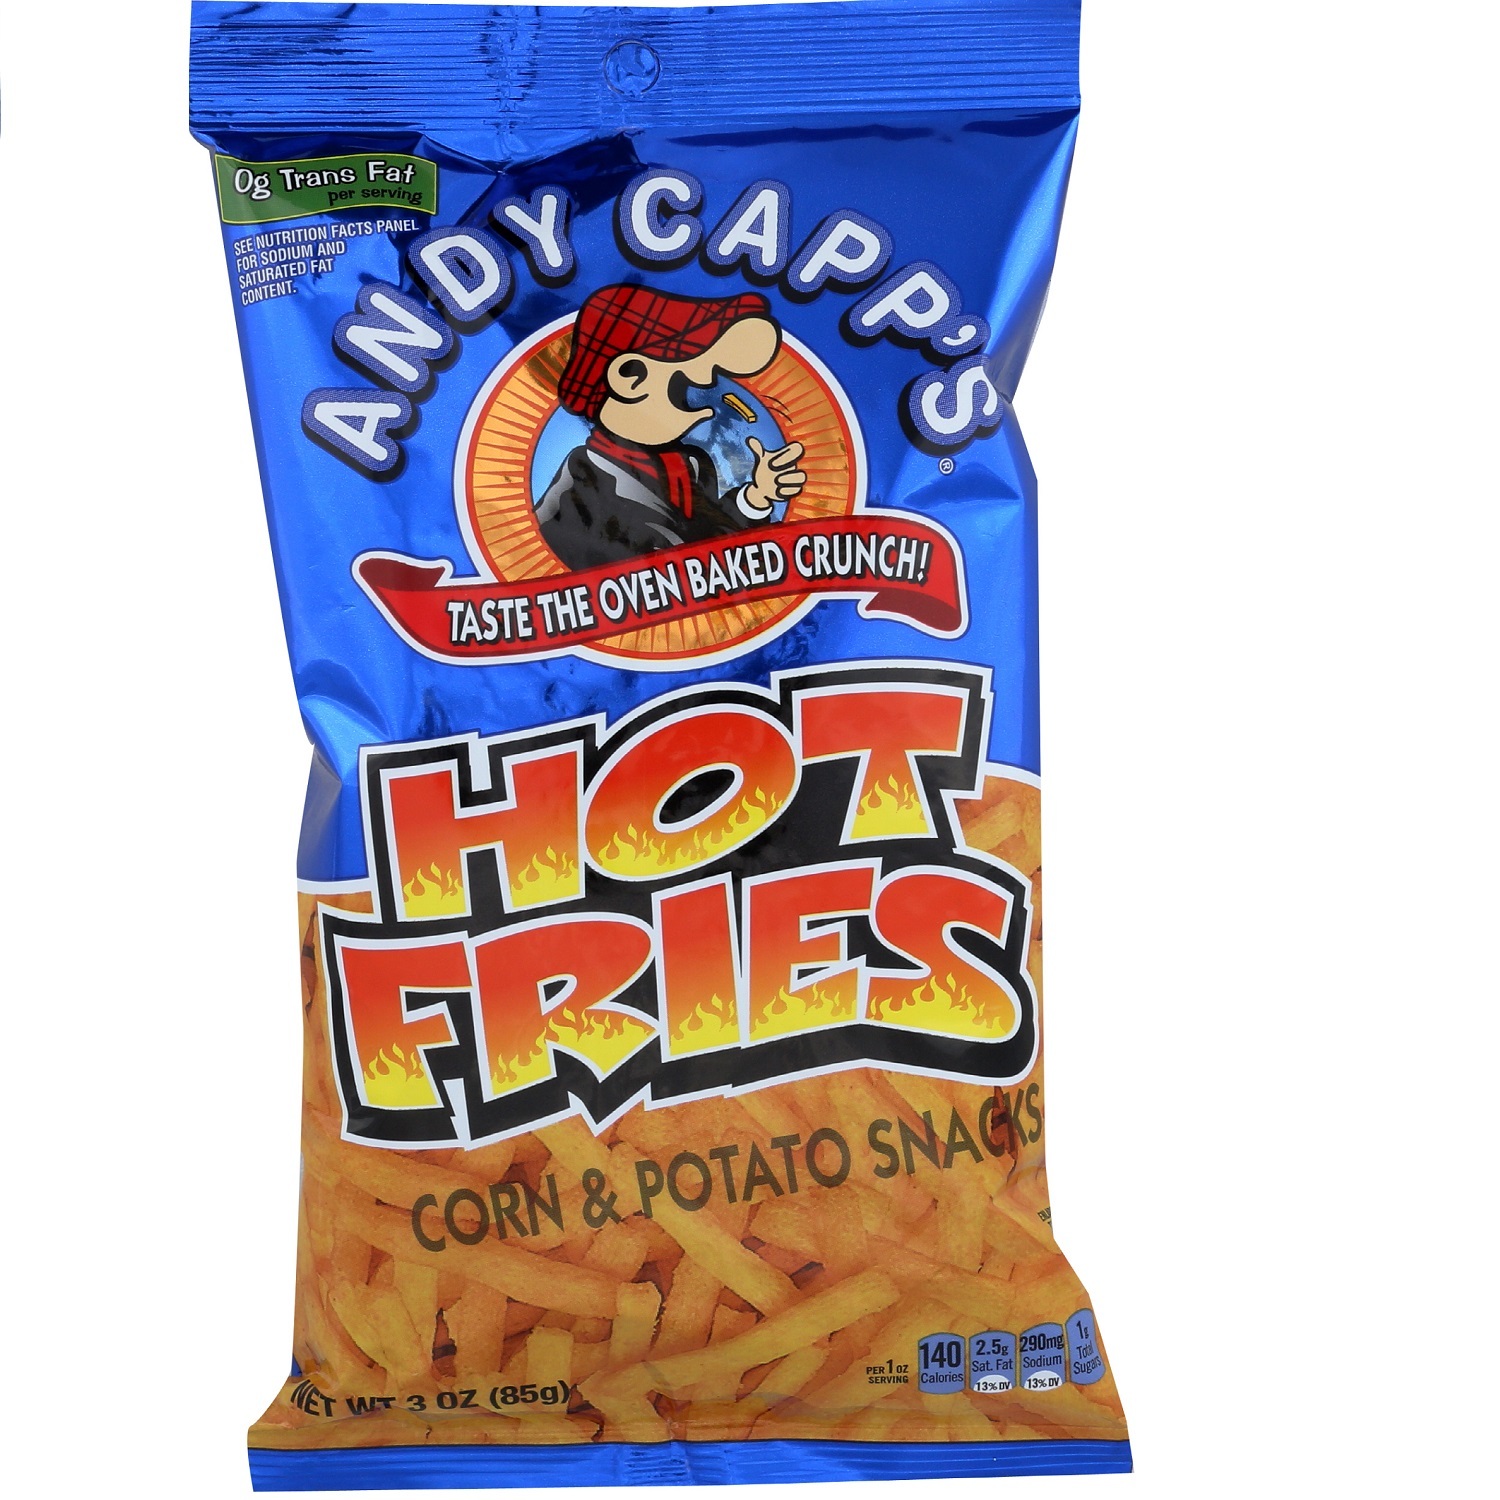 Wholesale Andy Capps Hot Fry Bag 3 Oz(14x.98)